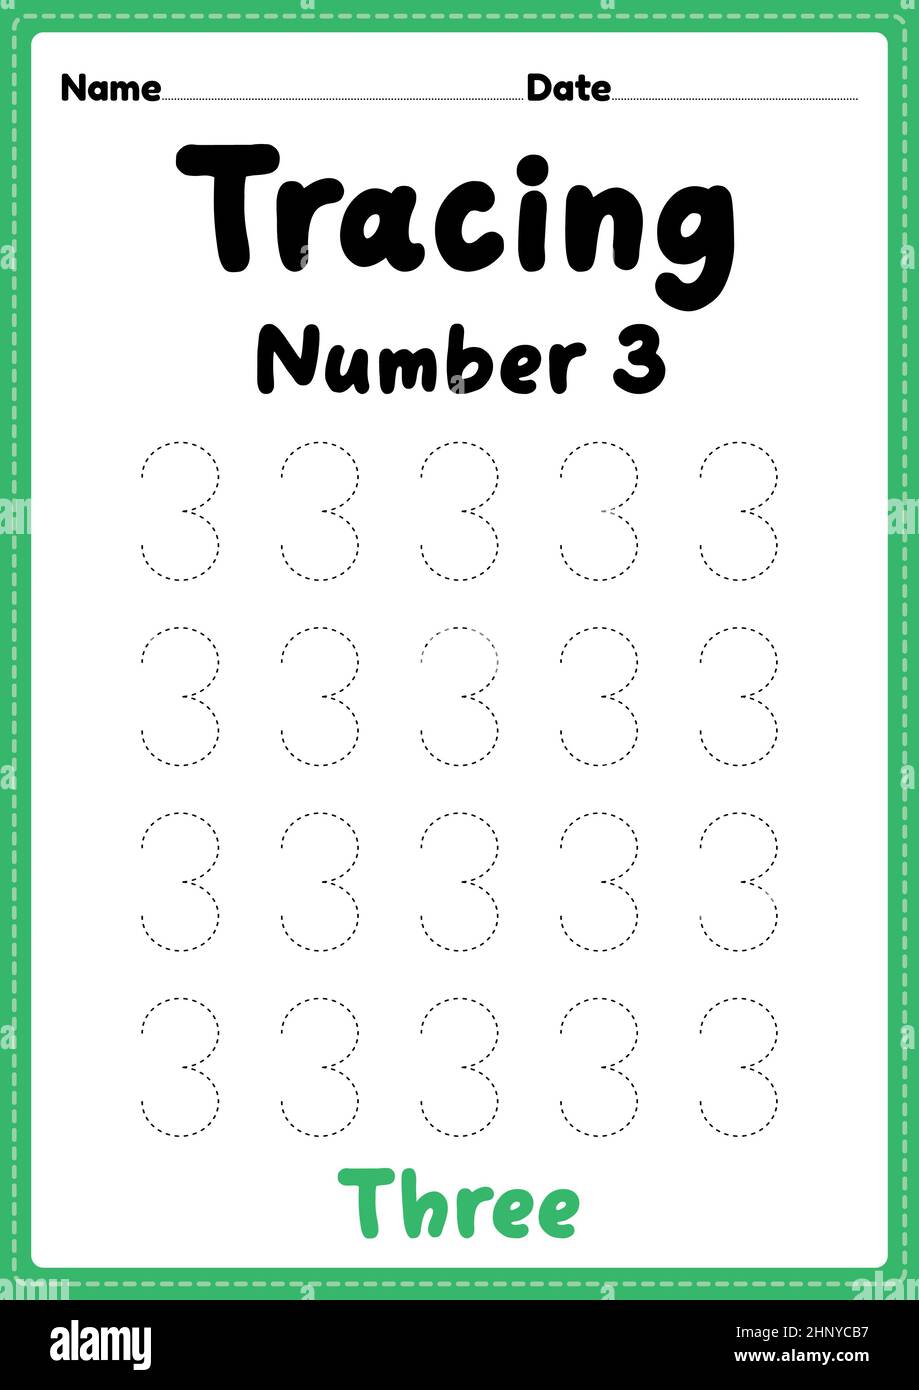 Tracing number 3 worksheet for kindergarten, preschool and Montessori kids for learning numbers and handwriting practice activities. Stock Photo